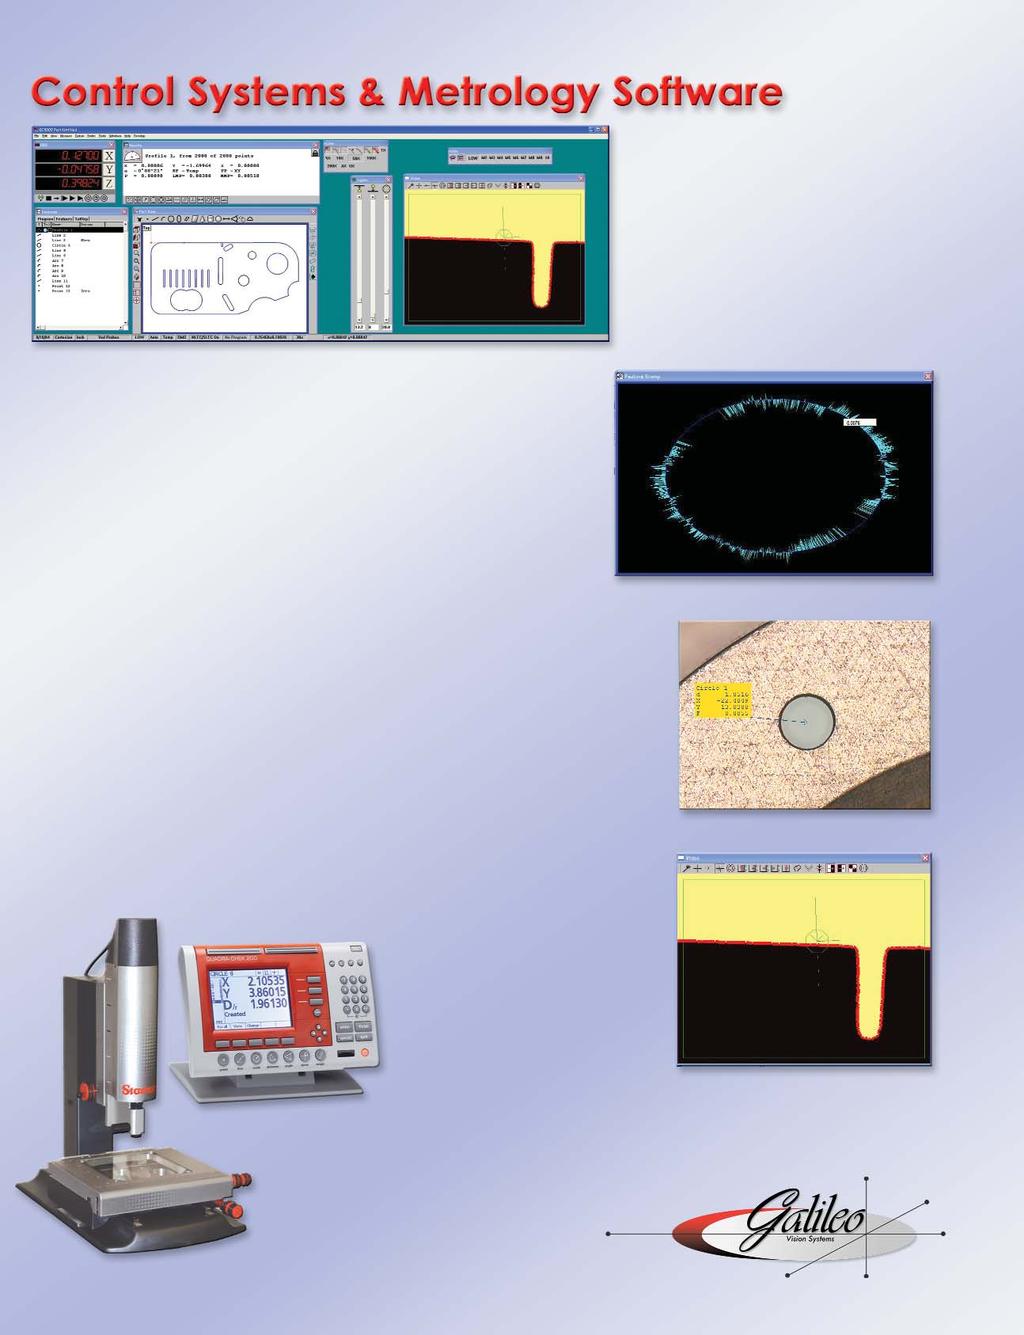 Galileo CNC Systems include the powerful, industry-leading Metronics Quadra-Chek QC-5000 software with dual monitors.